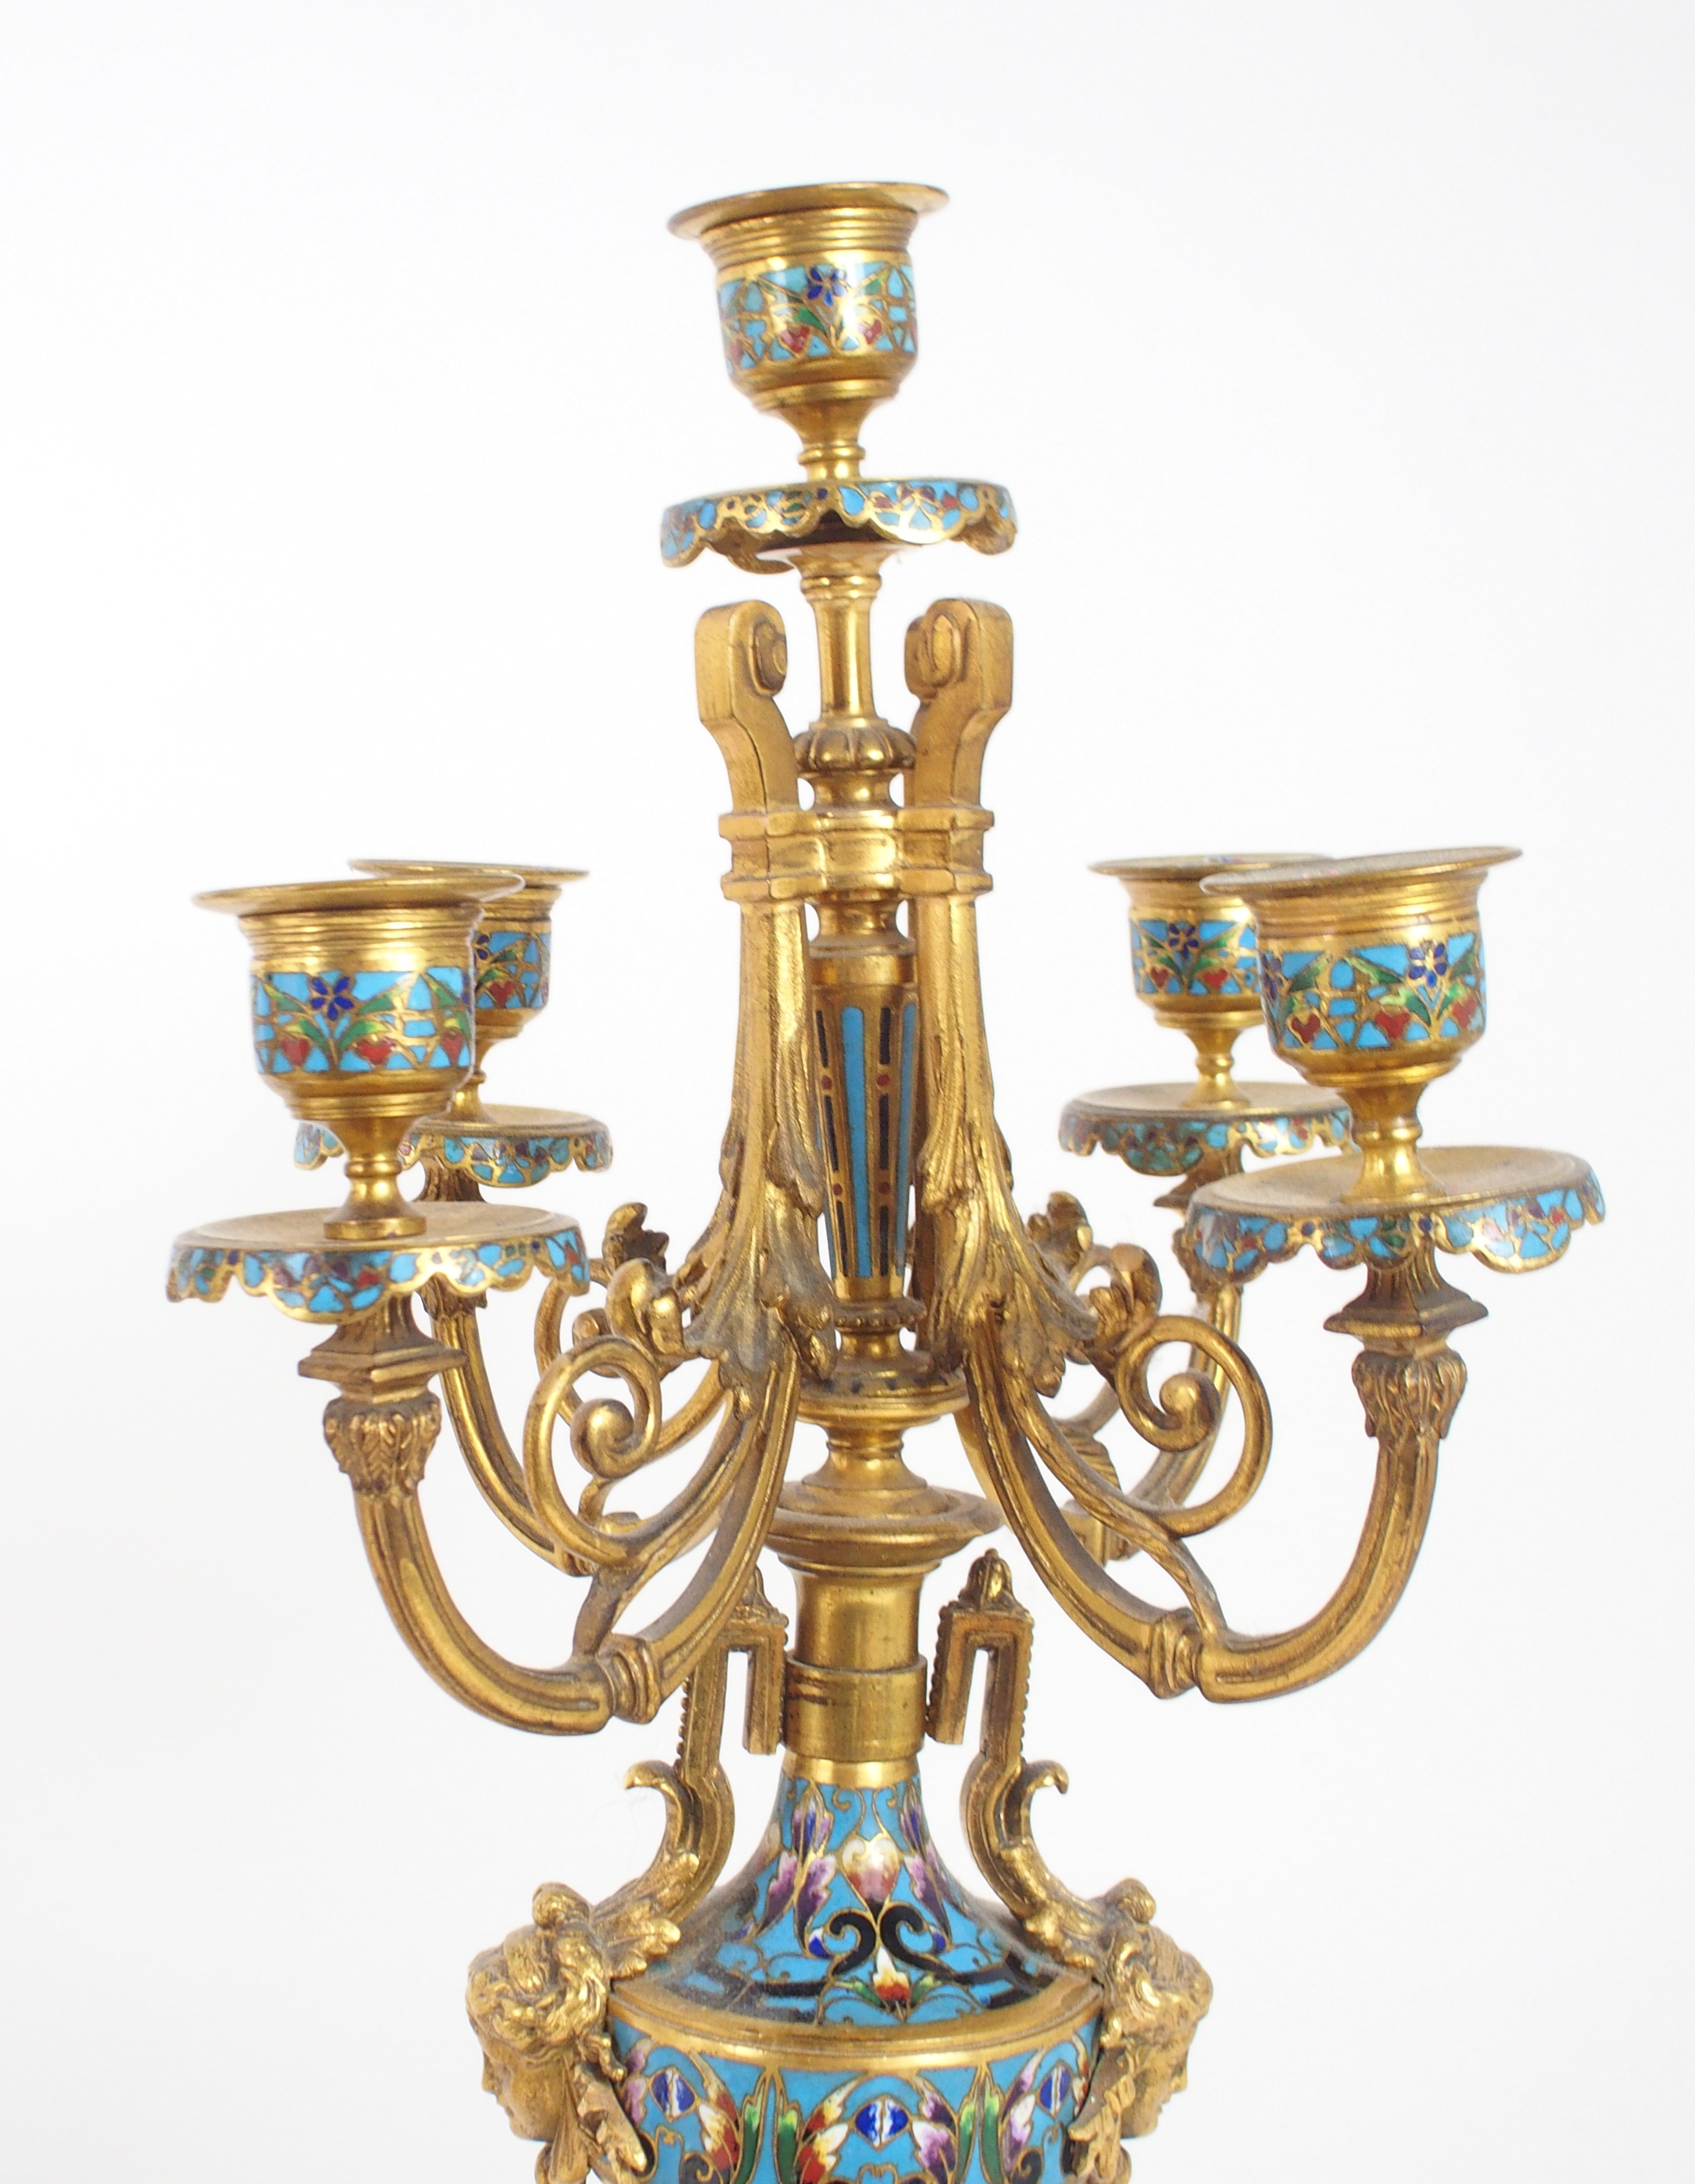 AN IMPRESSIVE 19TH CENTURY FRENCH CHAMPLEVE ENAMEL MANTLE CLOCK the urn mounted top with griffin han - Image 11 of 15